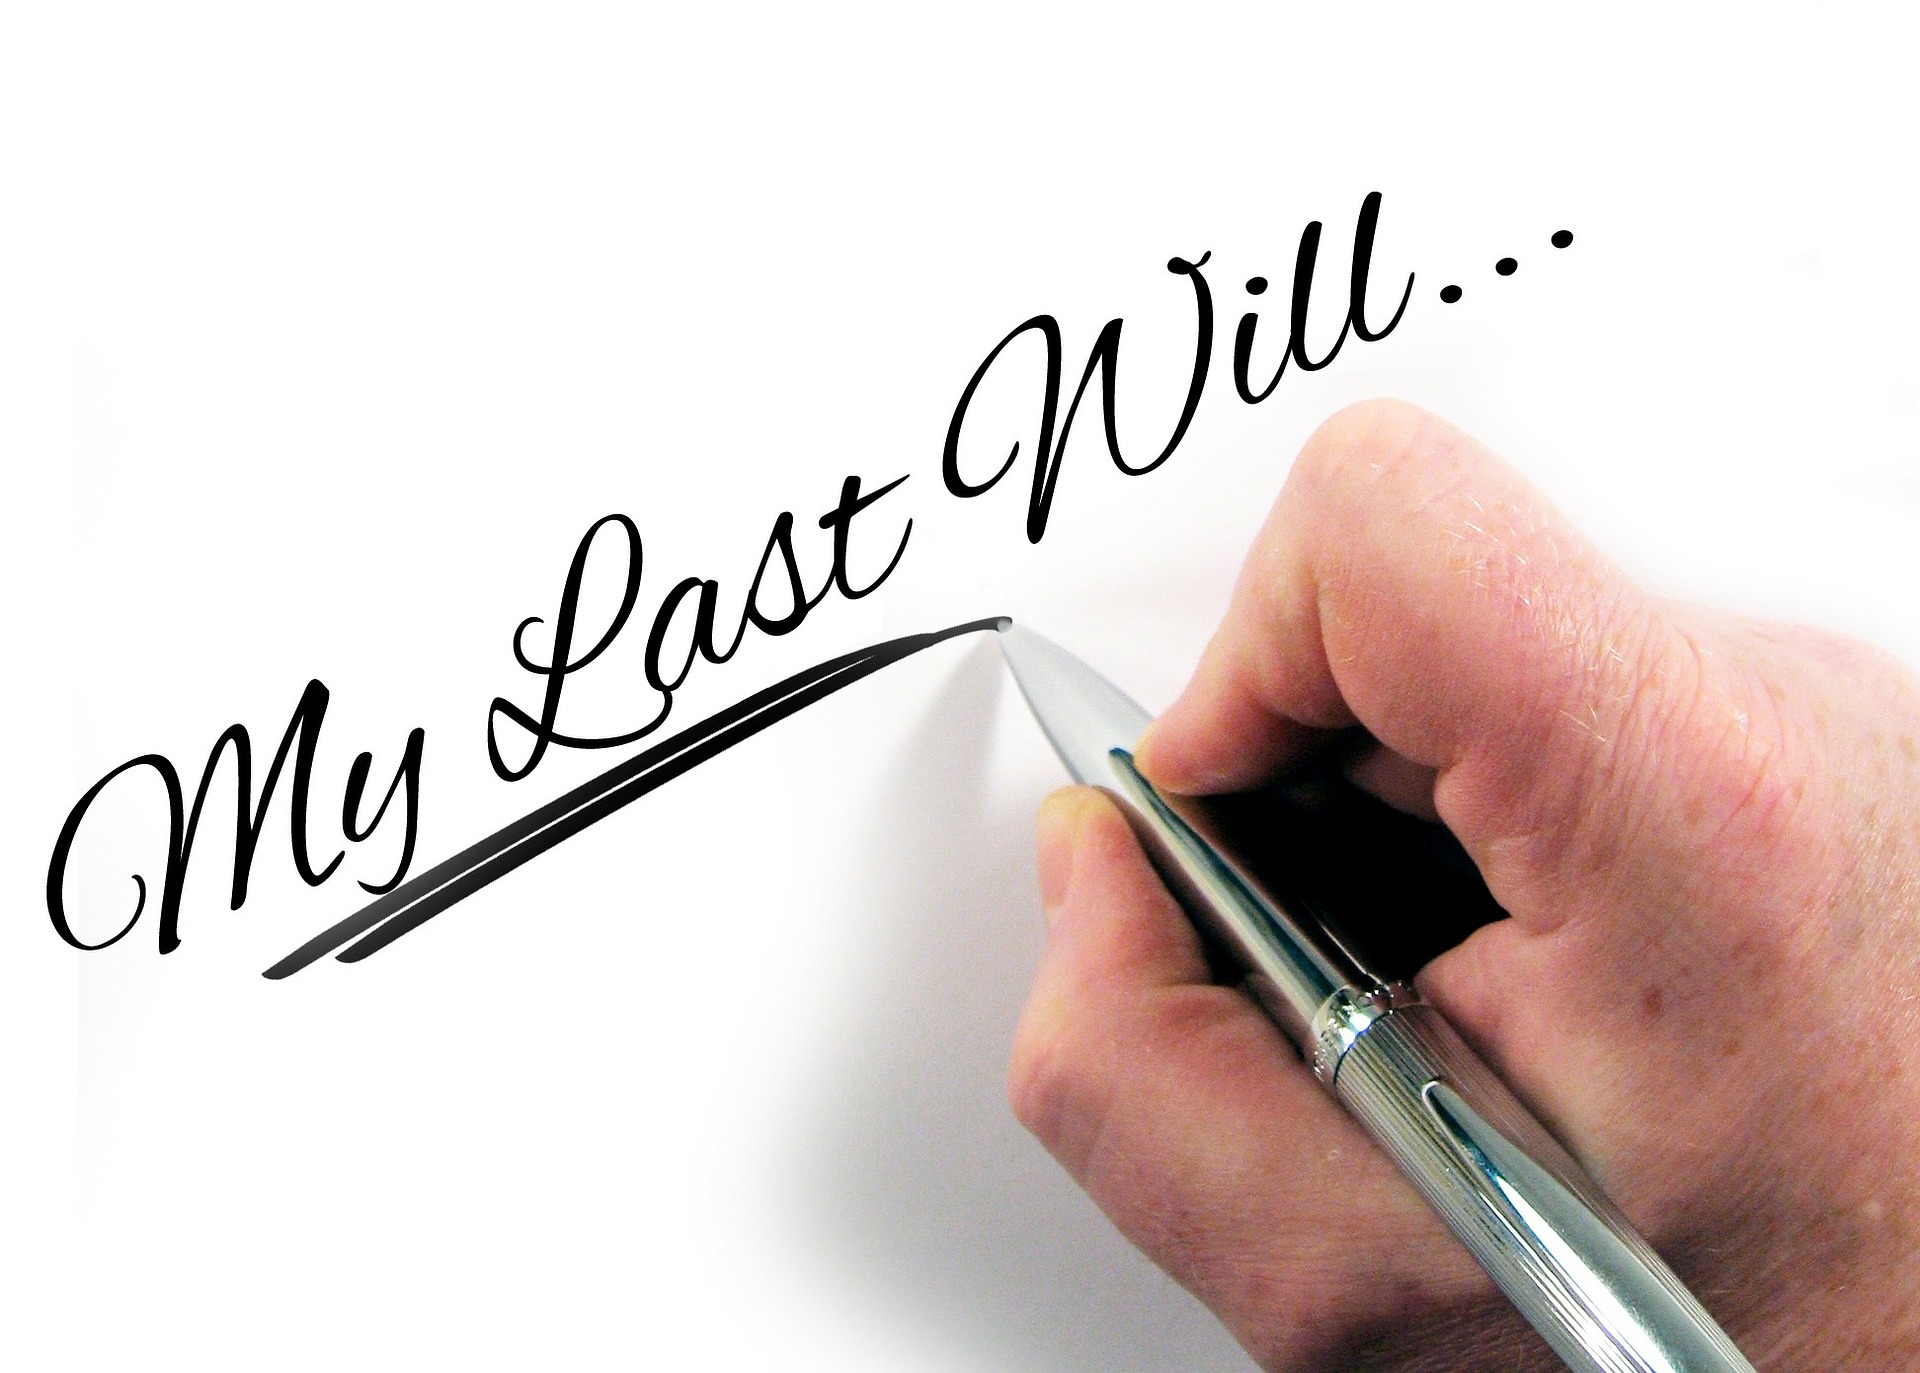 updating your will regularly